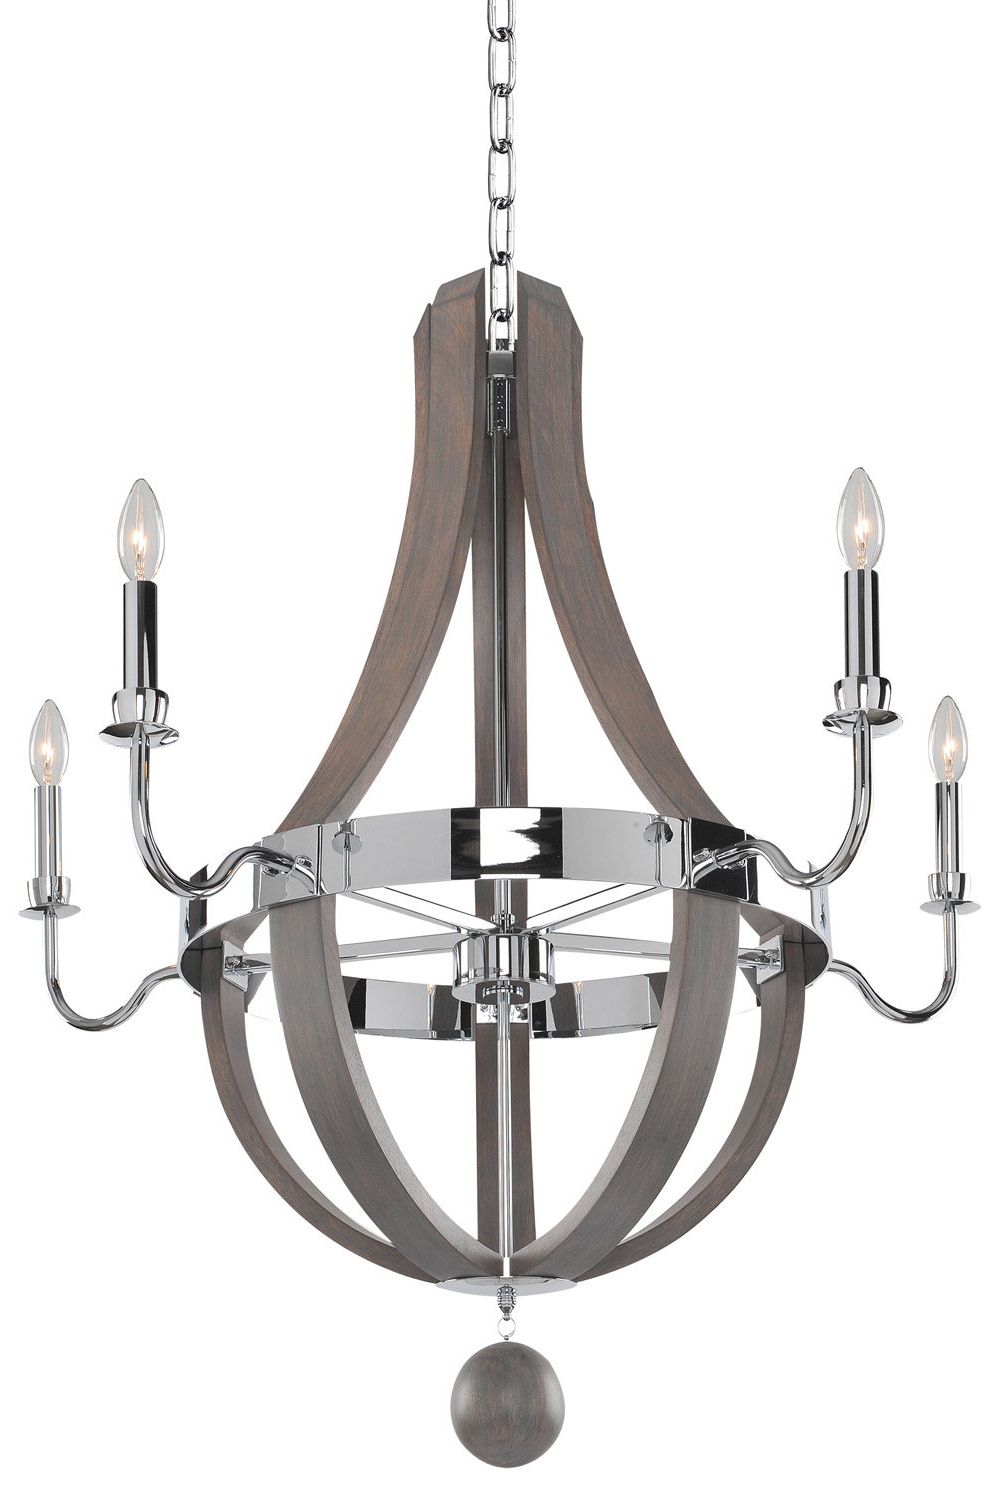 Kenna 5 Light Empire Chandeliers Pertaining To Well Known Sharlow 5 Light Empire Chandelier (View 14 of 20)